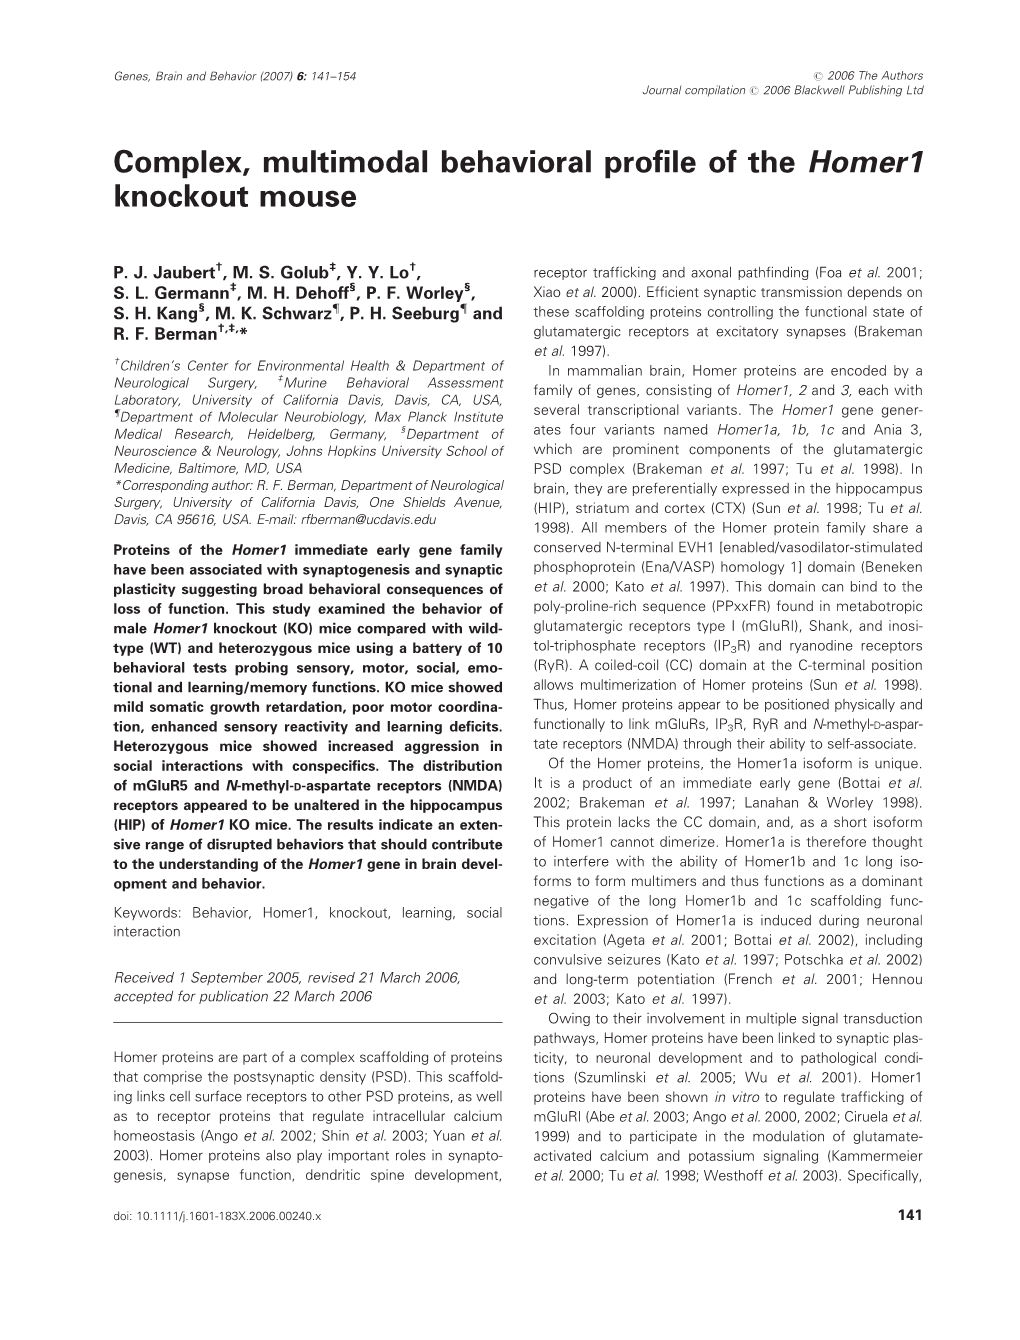 Complex, Multimodal Behavioral Profile of the Homer1 Knockout Mouse